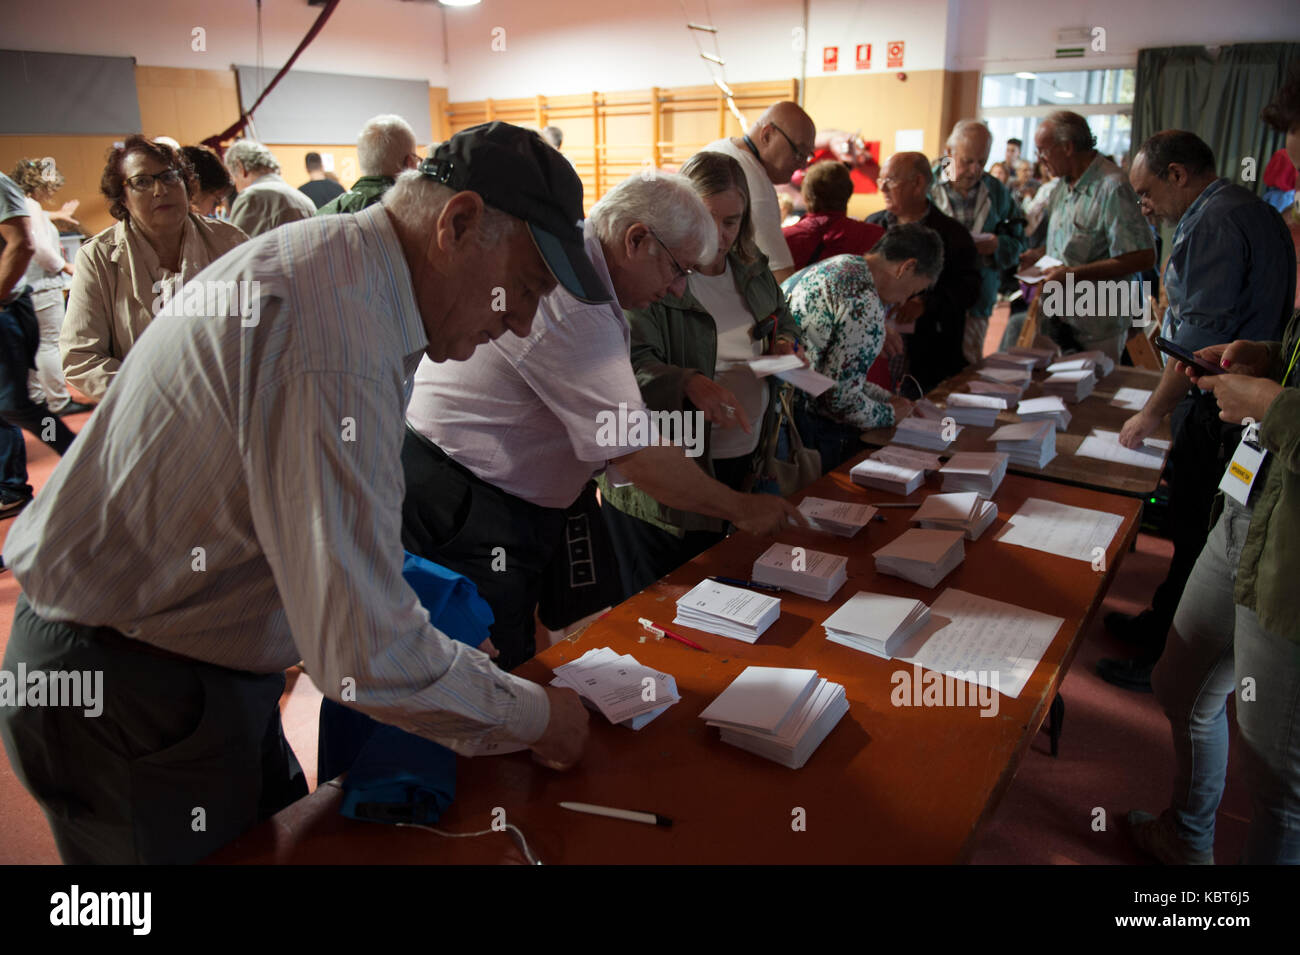 Barcelona, Catalonia. October 1, 2017. Spain. Voters collect ballots and vote in the electoral college llacuna where the vote is being made with total normality. Credit: Charlie Perez/Alamy Live News Stock Photo